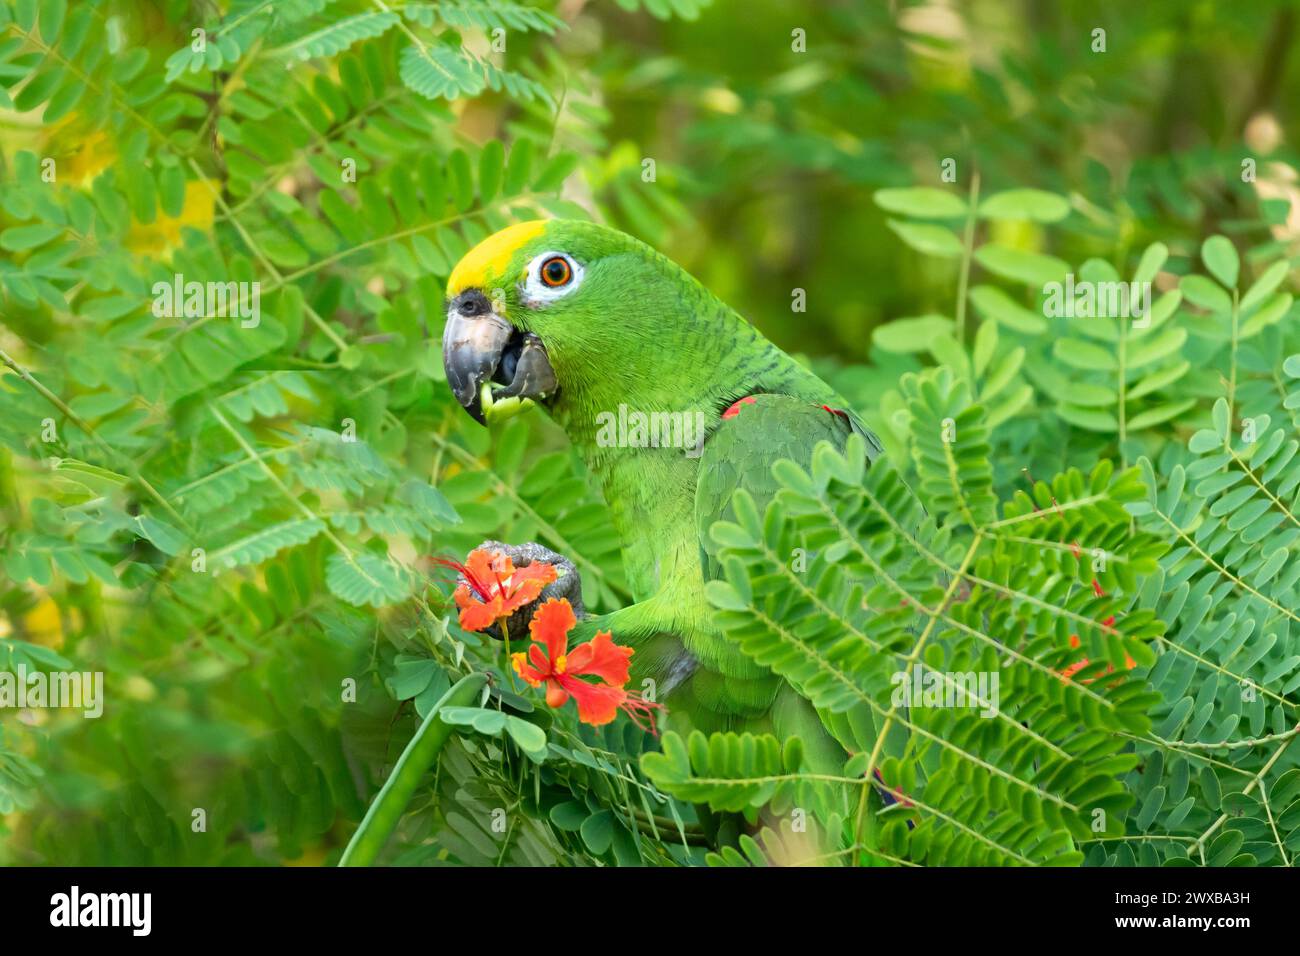 Head shot of a Yellow-crowned Parrot, Amazona ochrocephala, in a tree with a seed pod in its beak eating Stock Photo